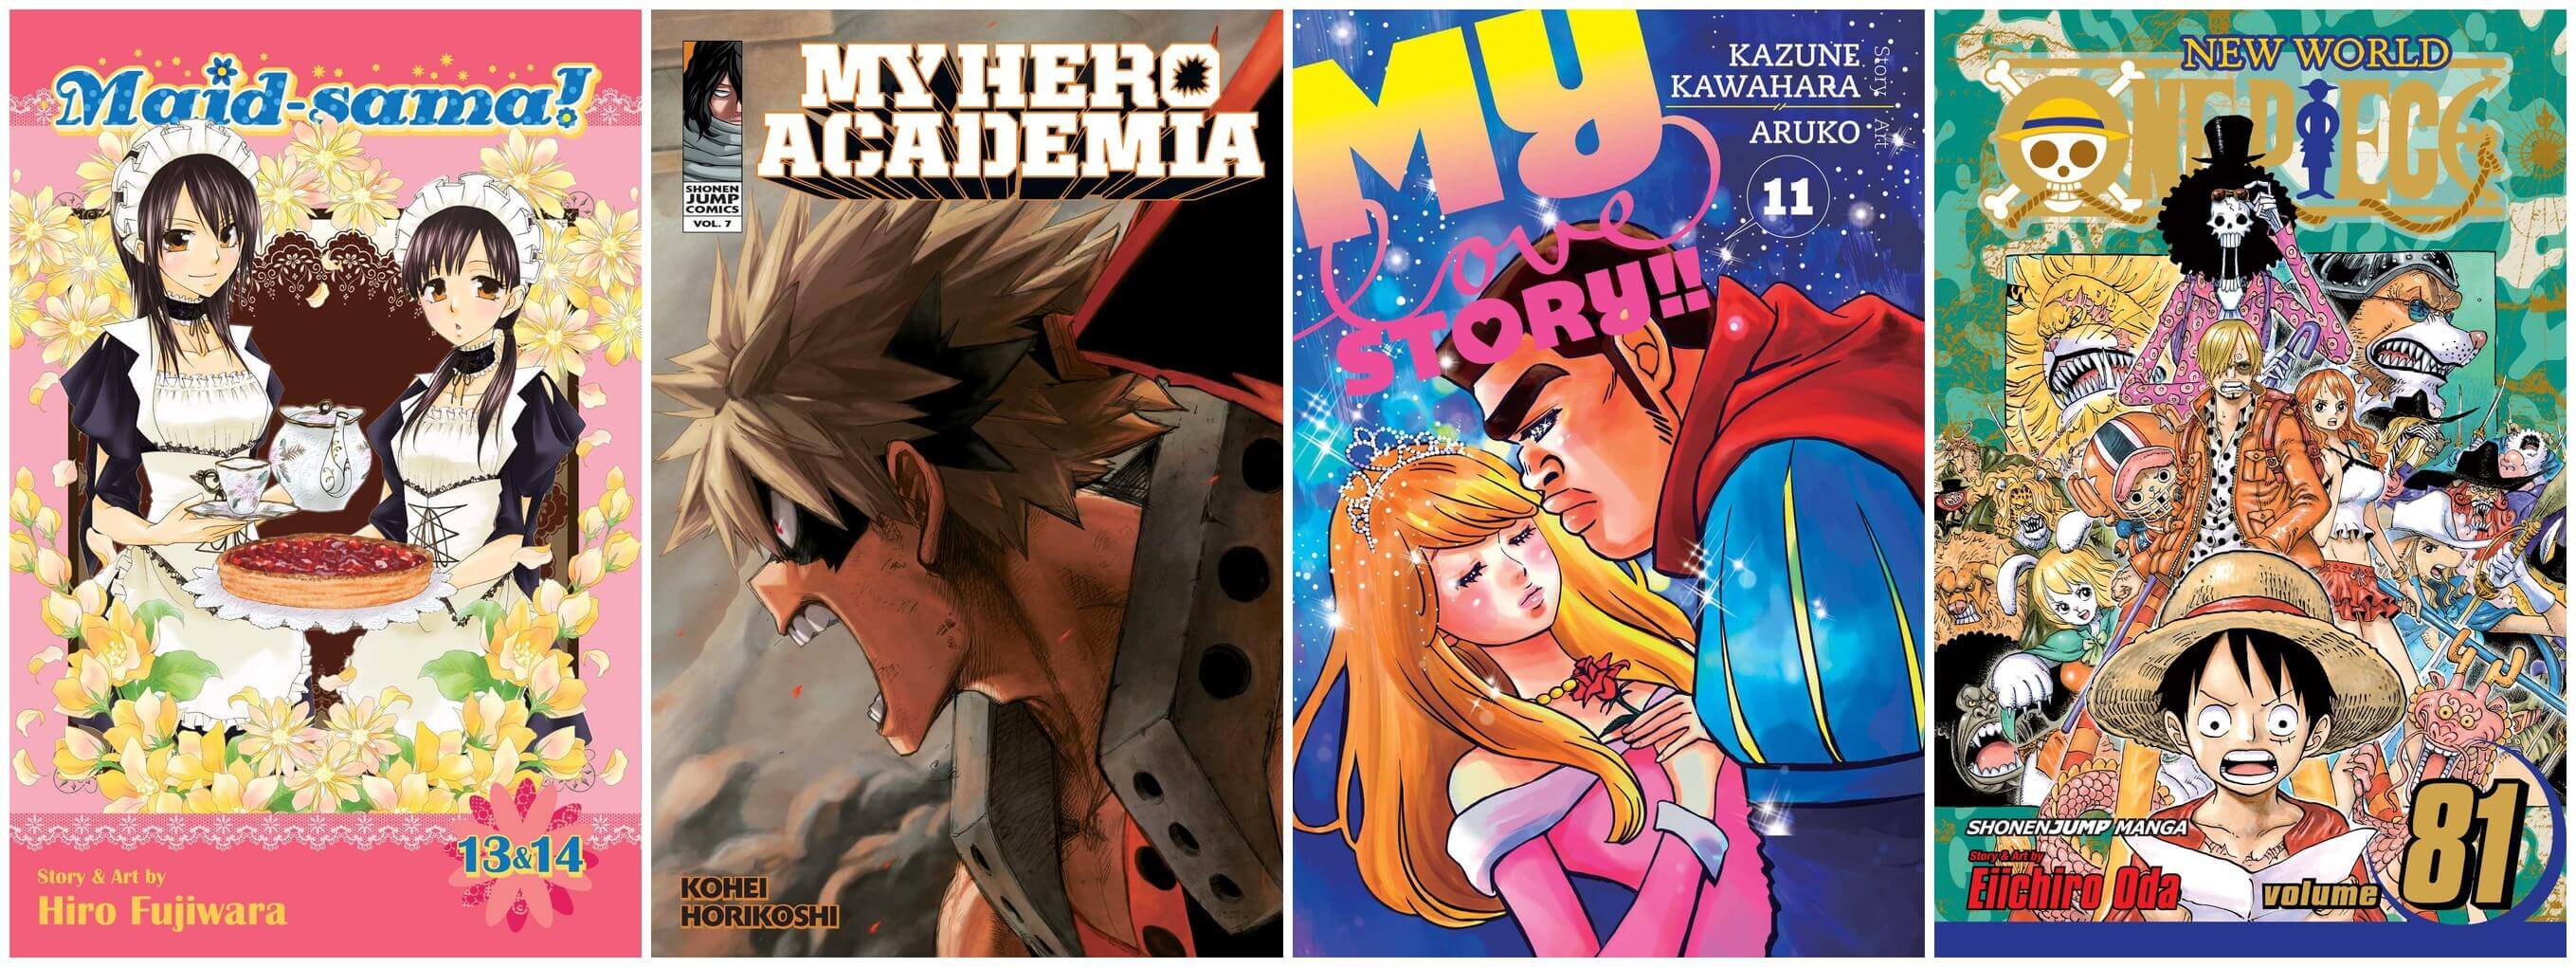 February 2017 Manga Releases Covers for Maid-sama, My Hero Academia, My Love Story, and One Piece.